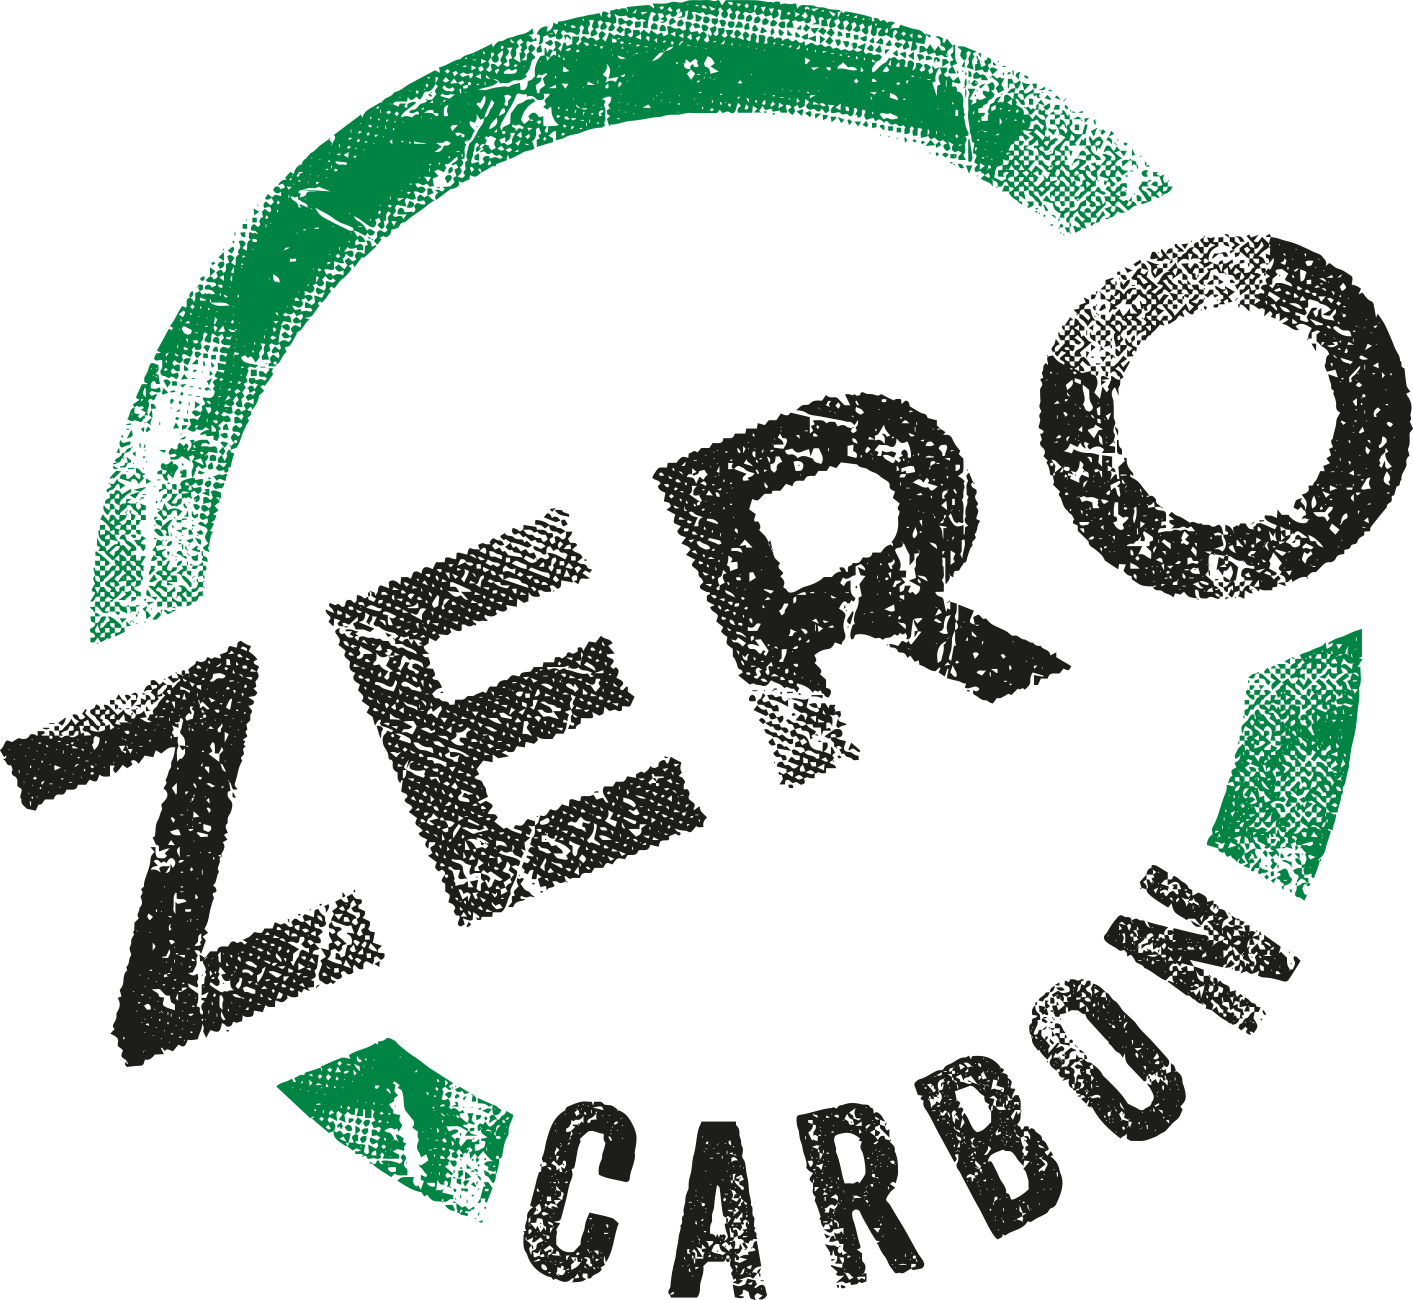 Most countries opting for the 'net zero' goal in the next 20 to 30 years would create significant demand for the company's products and services, he said, adding that its strong global network would help the firm scale up operations and create a growing sustainable business model.